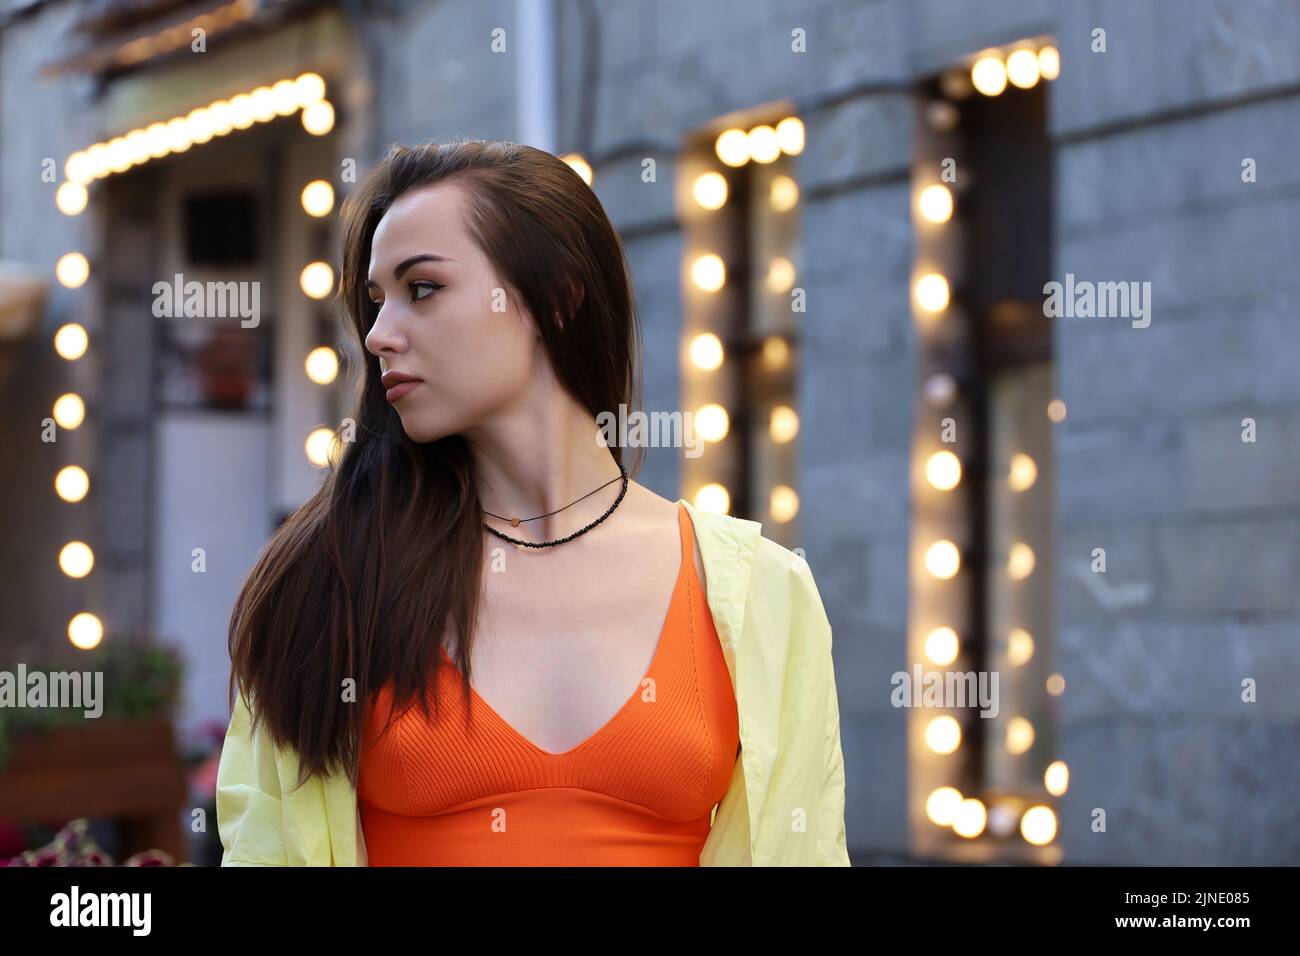 Portrait of pretty young girl with long hair and perfect makeup wearing orange top and yellow shirt on a street on blurred lights background Stock Photo